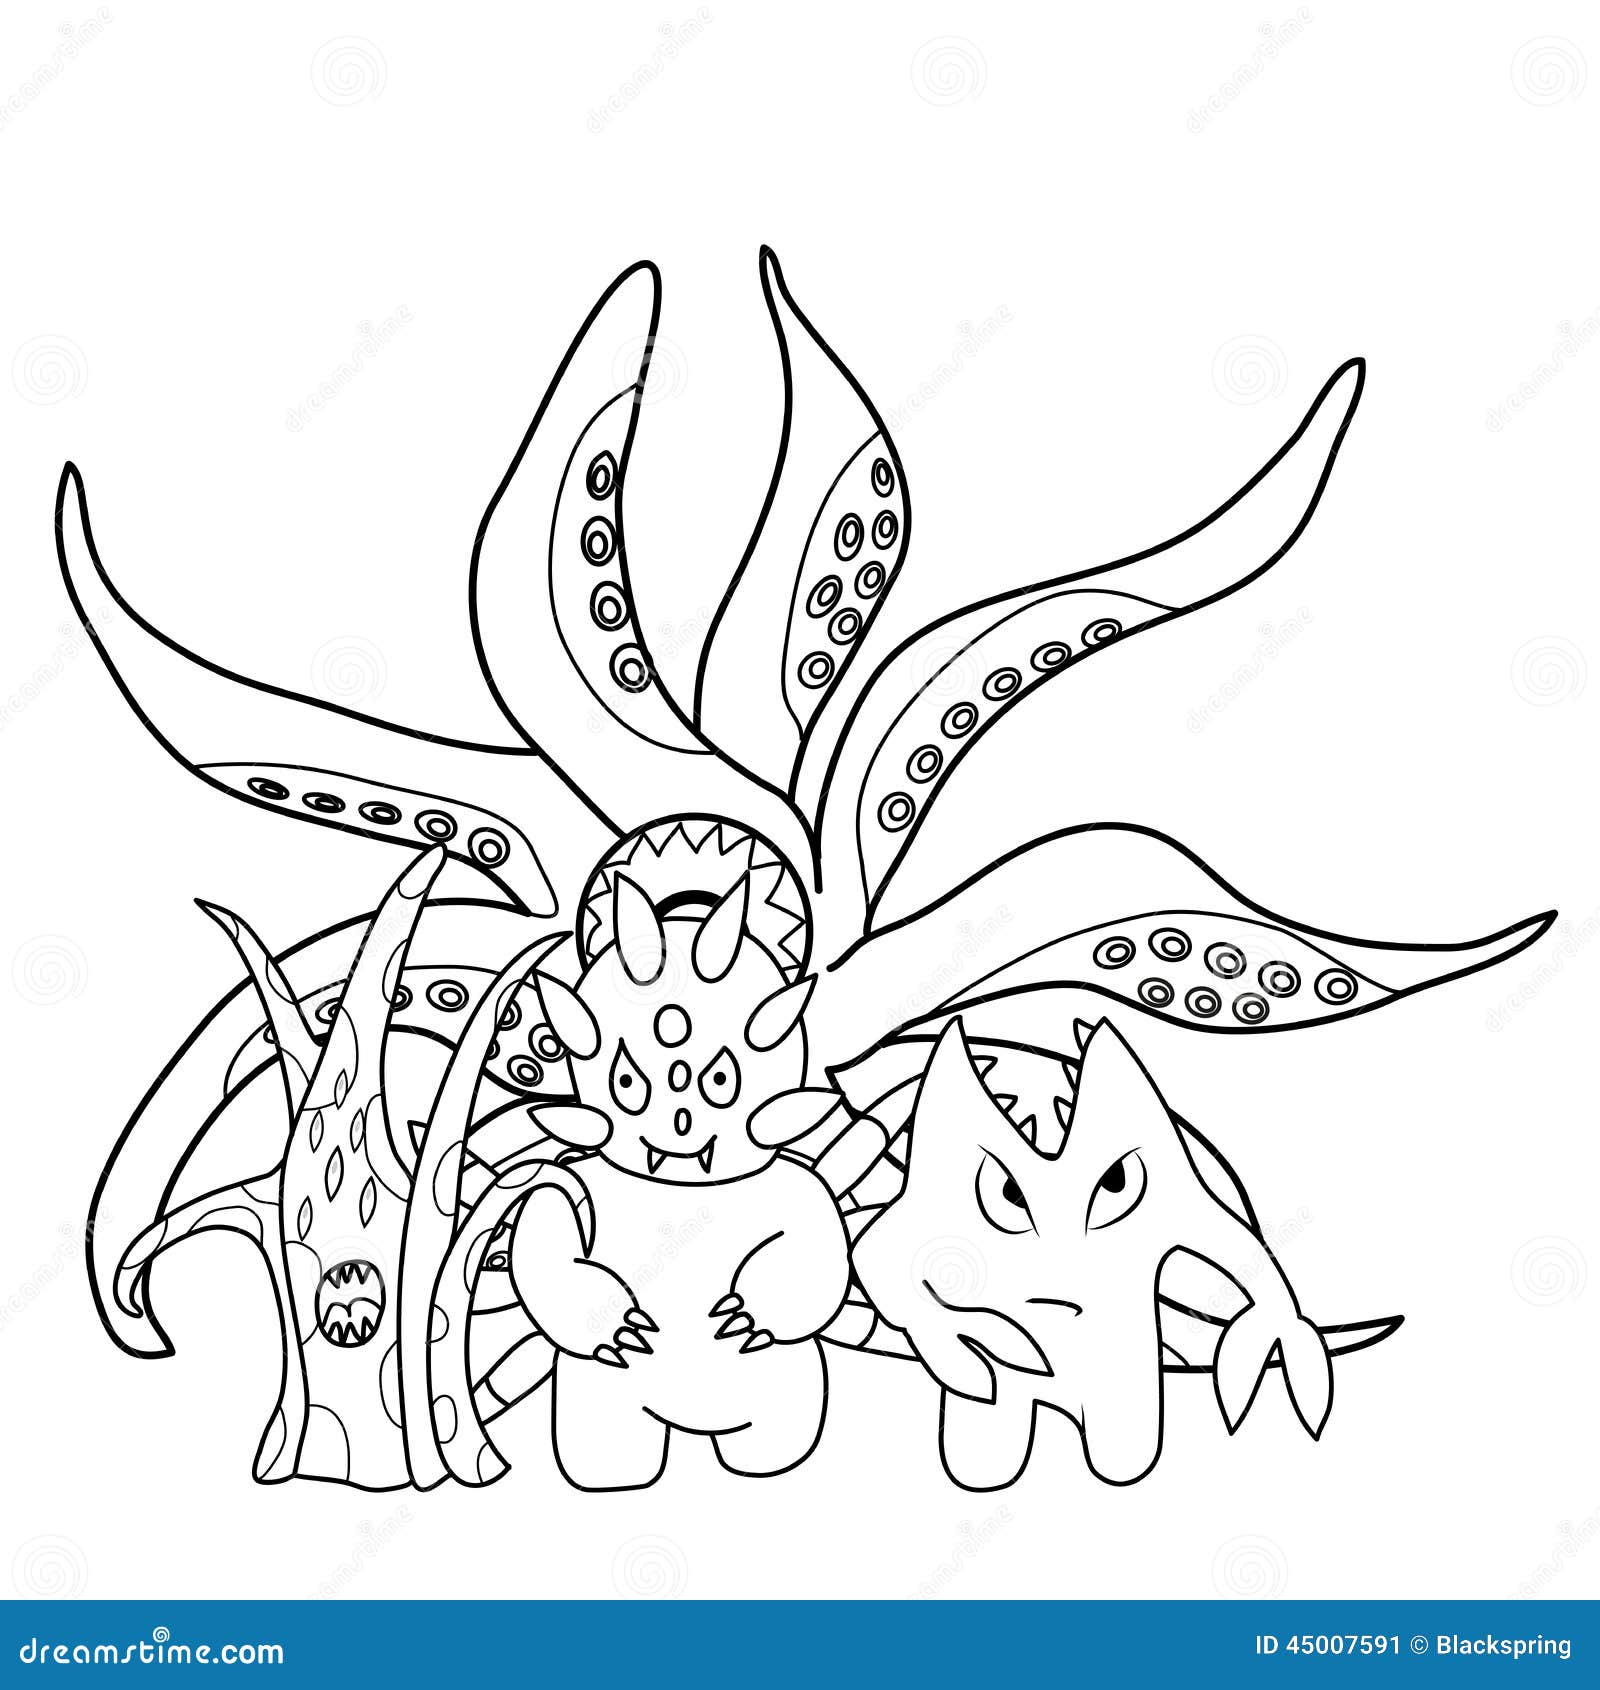 Coloring Book. Scary Cartoon Monsters Stock Vector - Image: 45007591